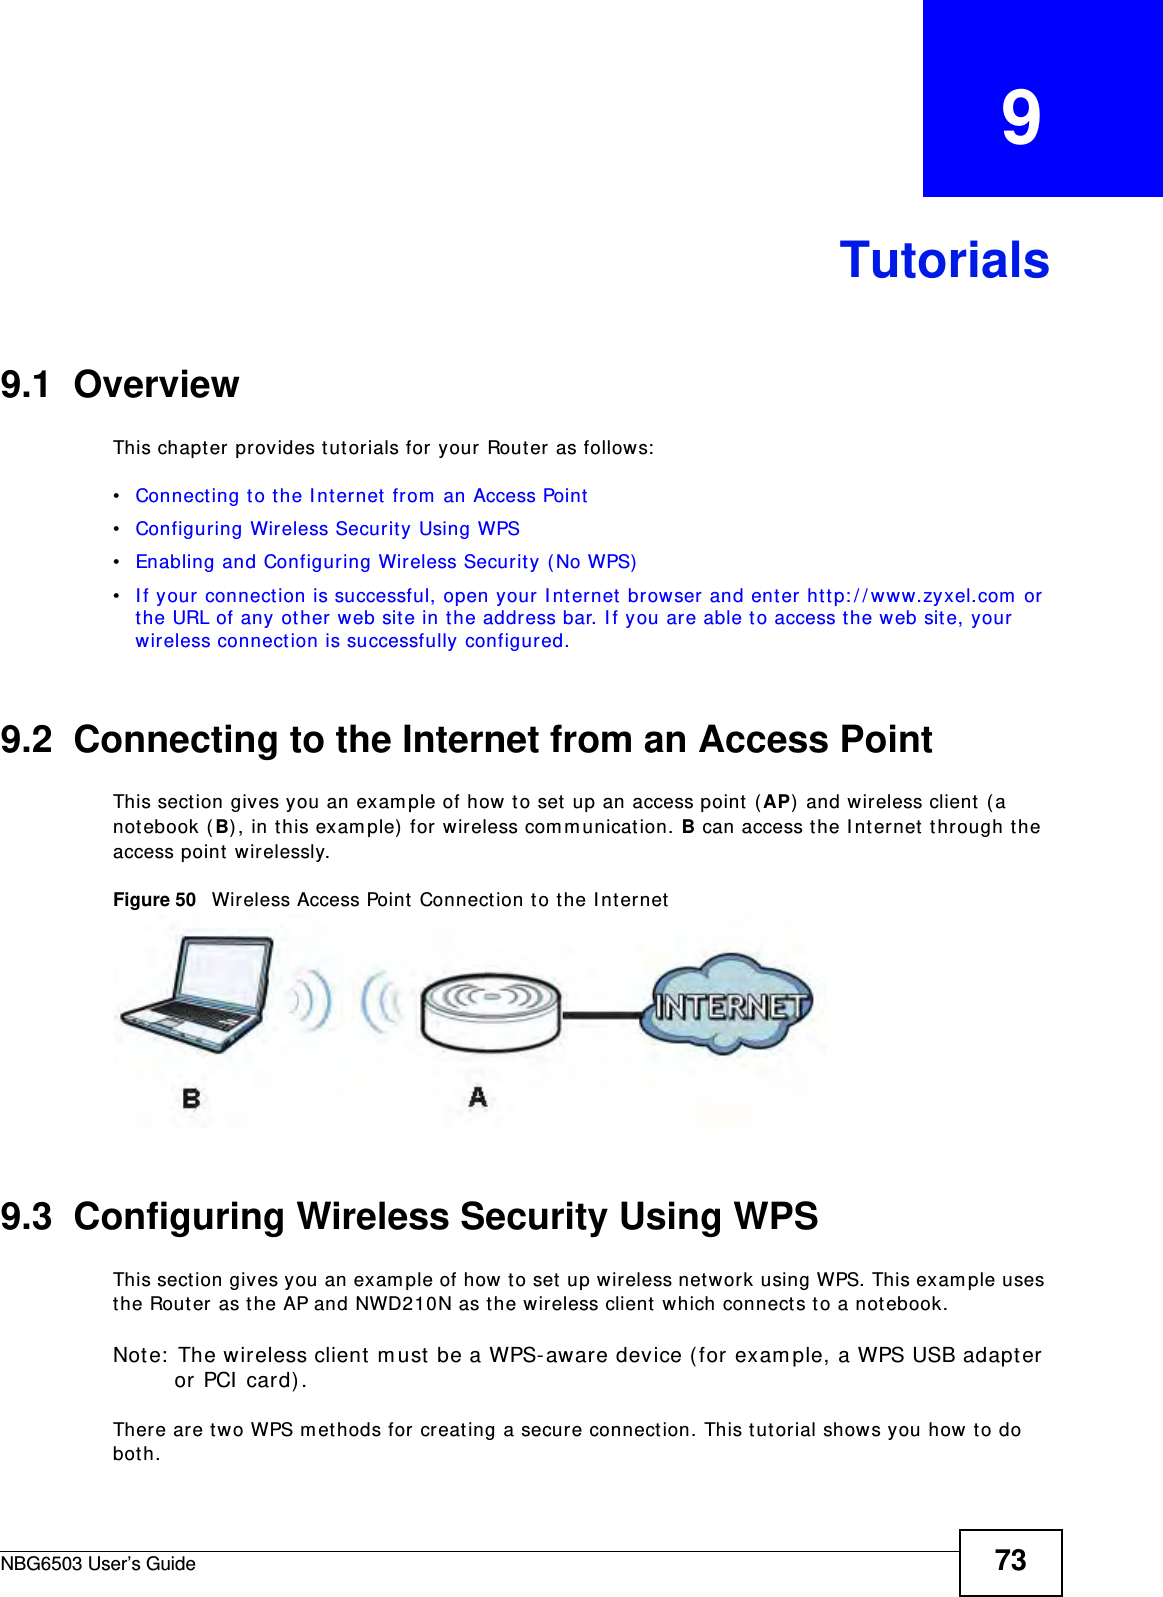 NBG6503 User’s Guide 73CHAPTER   9Tutorials9.1  OverviewThis chapter provides tutorials for your Router as follows:•Connecting to the Internet from an Access Point•Configuring Wireless Security Using WPS•Enabling and Configuring Wireless Security (No WPS)•If your connection is successful, open your Internet browser and enter http://www.zyxel.com or the URL of any other web site in the address bar. If you are able to access the web site, your wireless connection is successfully configured.9.2  Connecting to the Internet from an Access PointThis section gives you an example of how to set up an access point (AP) and wireless client (a notebook (B), in this example) for wireless communication. B can access the Internet through the access point wirelessly.Figure 50   Wireless Access Point Connection to the Internet9.3  Configuring Wireless Security Using WPSThis section gives you an example of how to set up wireless network using WPS. This example uses the Router as the AP and NWD210N as the wireless client which connects to a notebook. Note: The wireless client must be a WPS-aware device (for example, a WPS USB adapter or PCI card).There are two WPS methods for creating a secure connection. This tutorial shows you how to do both.